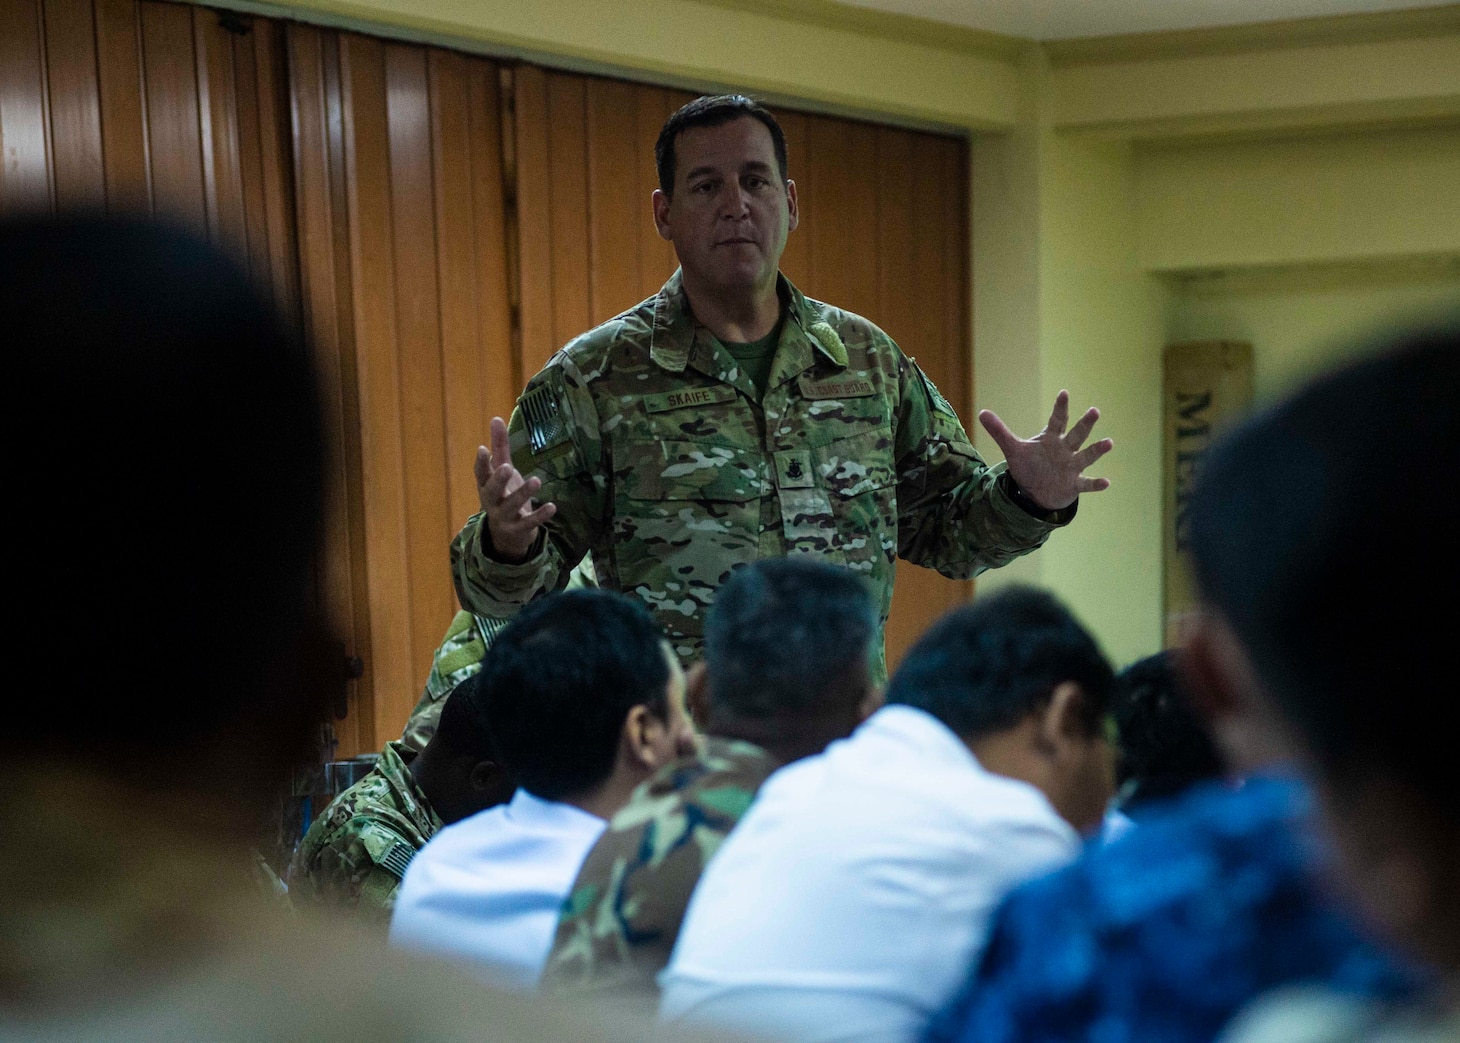 MANILA, Philippines (Aug. 19, 2019) U.S. Coast Guard Chief Maritime Enforcement Specialist Eric Skaife, assigned to Tactical Law Enforcement Team Pacific, briefs international laws and use of force to Indo-Pacific partners during Southeast Asia Cooperation and Training (SEACAT) 2019 at the Philippine Coast Guard Headquarters in Manila. This year marks the 18th iteration of SEACAT, which is designed to enhance maritime security skills by highlighting the value of information sharing and multilateral coordination.